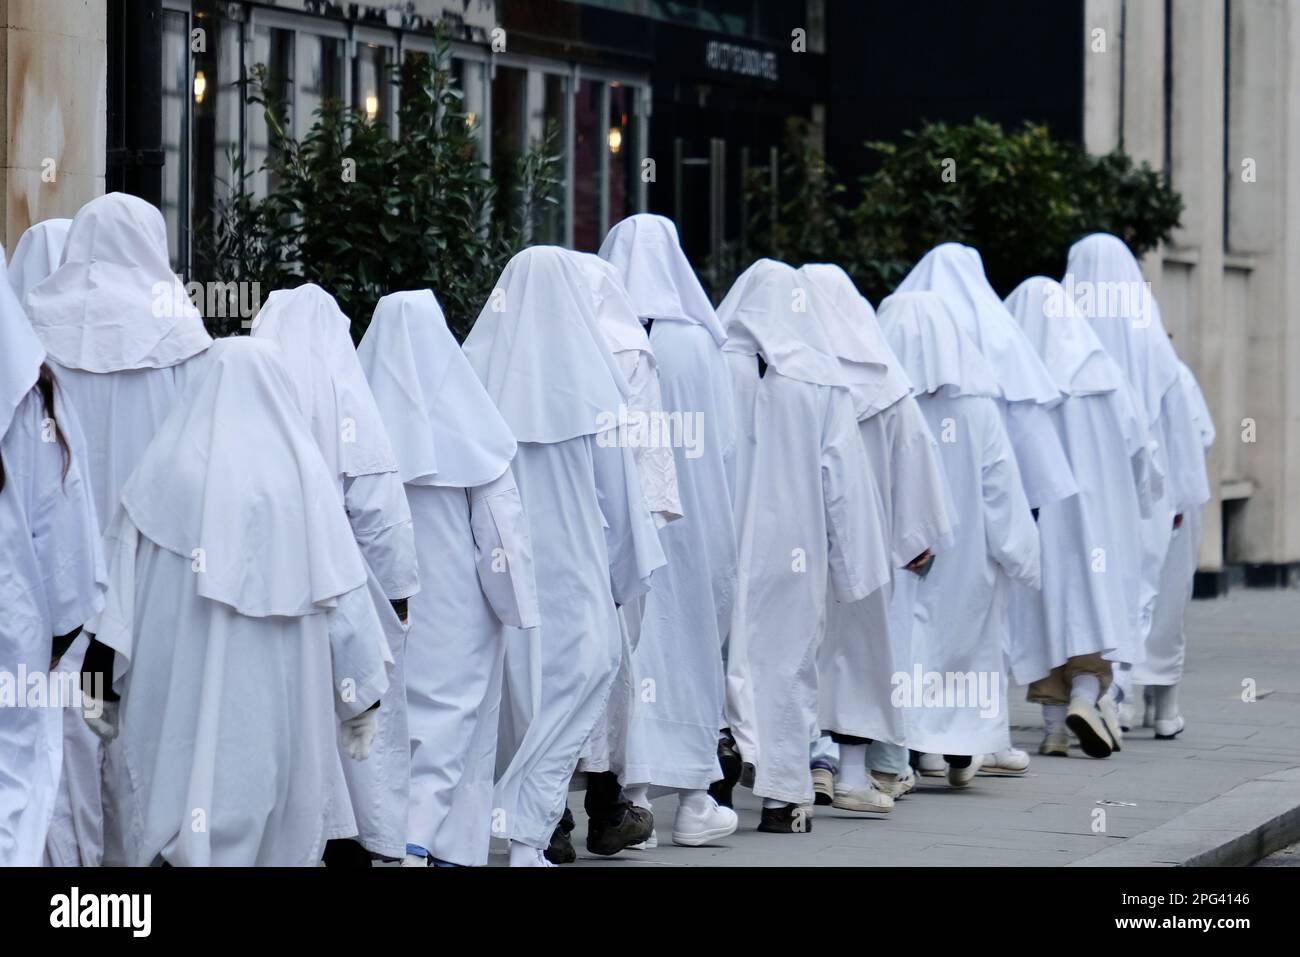 London, UK. 20th March, 2023. The Druid Order marks the Spring - or Vernal Equinox, where the length or day and night are equal. Participants celebrating the first day of spring, performed rituals in a ceremony close to the Tower of London. Credit: Eleventh Hour Photography/Alamy Live News Stock Photo